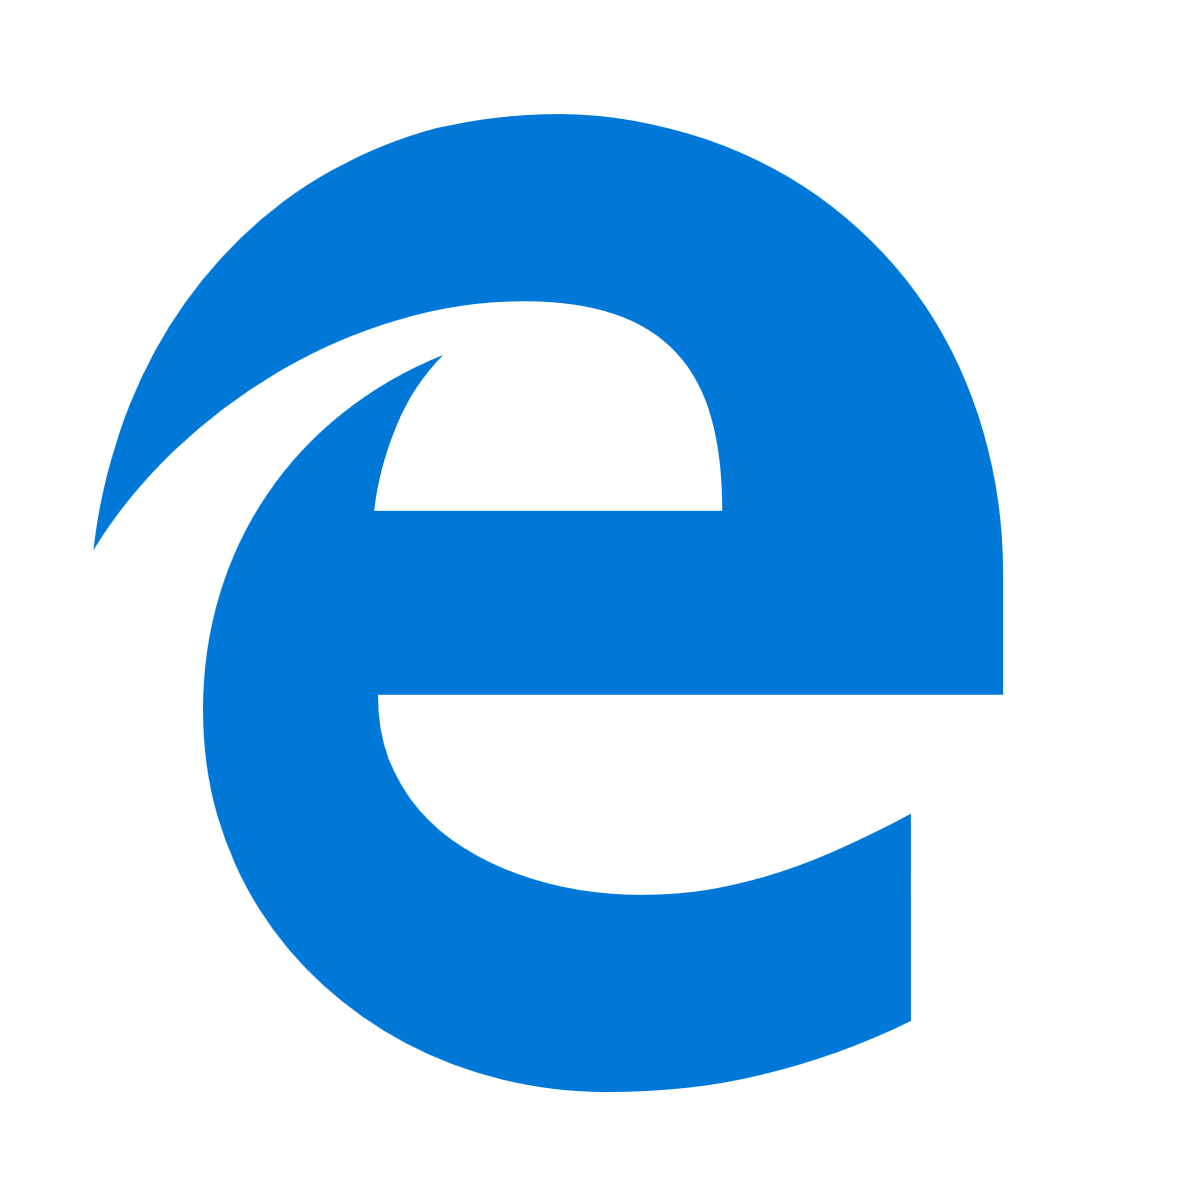 Microsoft Edge is out, Chromium Edge takes its place